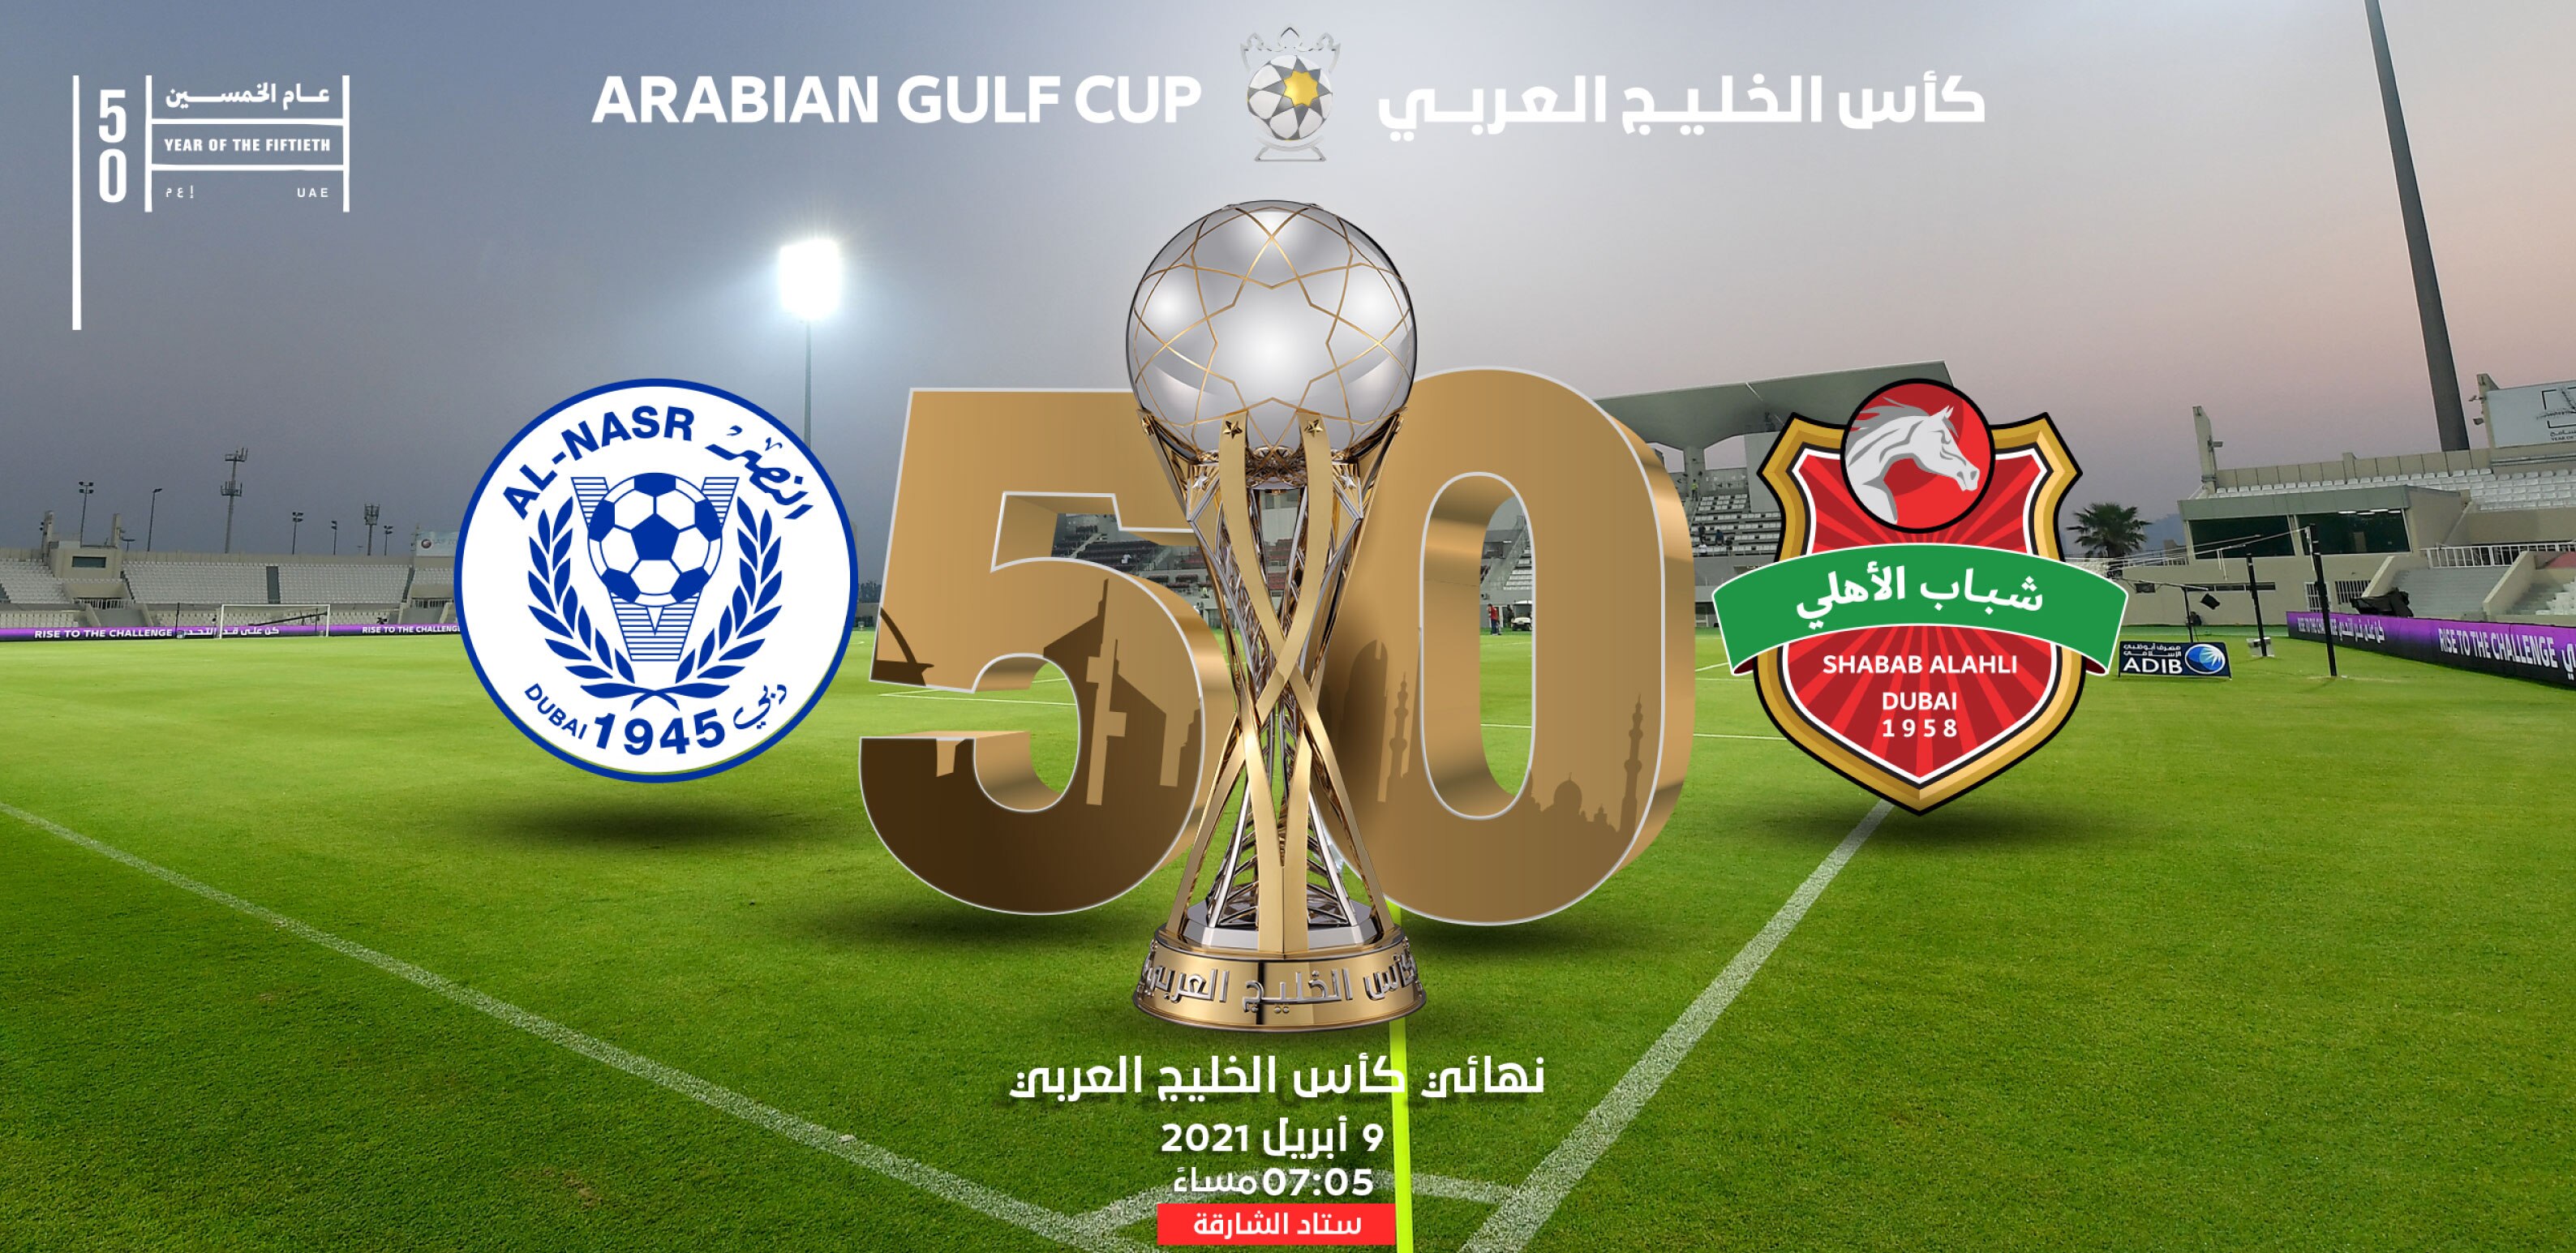 Launching the slogan "The 50th Cup" at the final of the Arabian Gulf